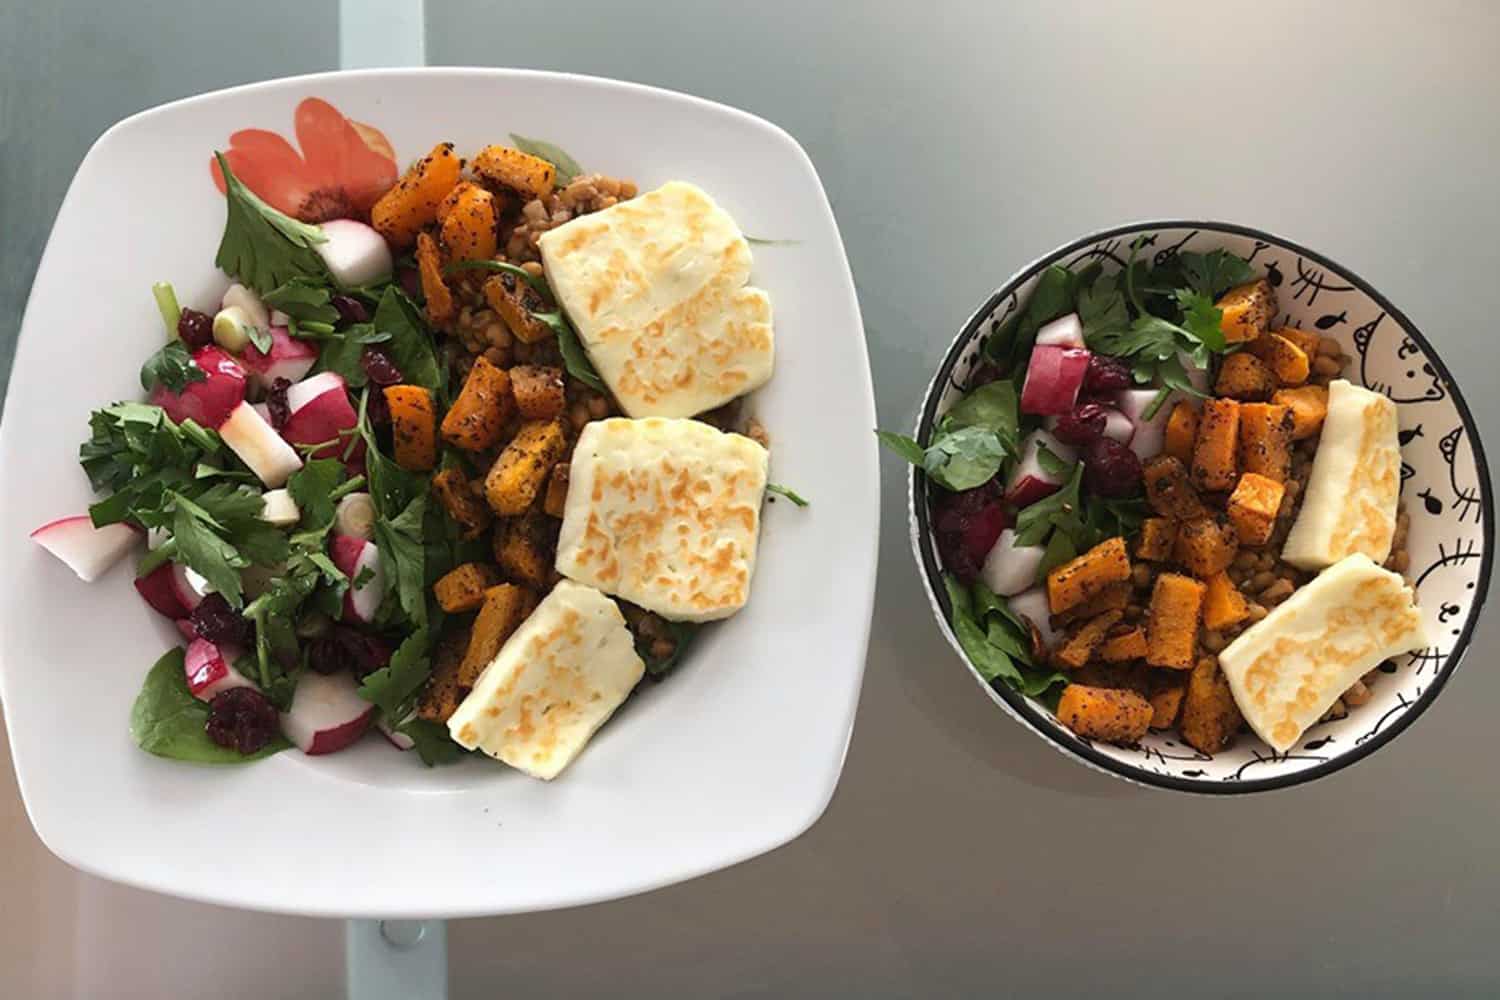 Spinach, Roasted Squash and Halloumi Cheese salad